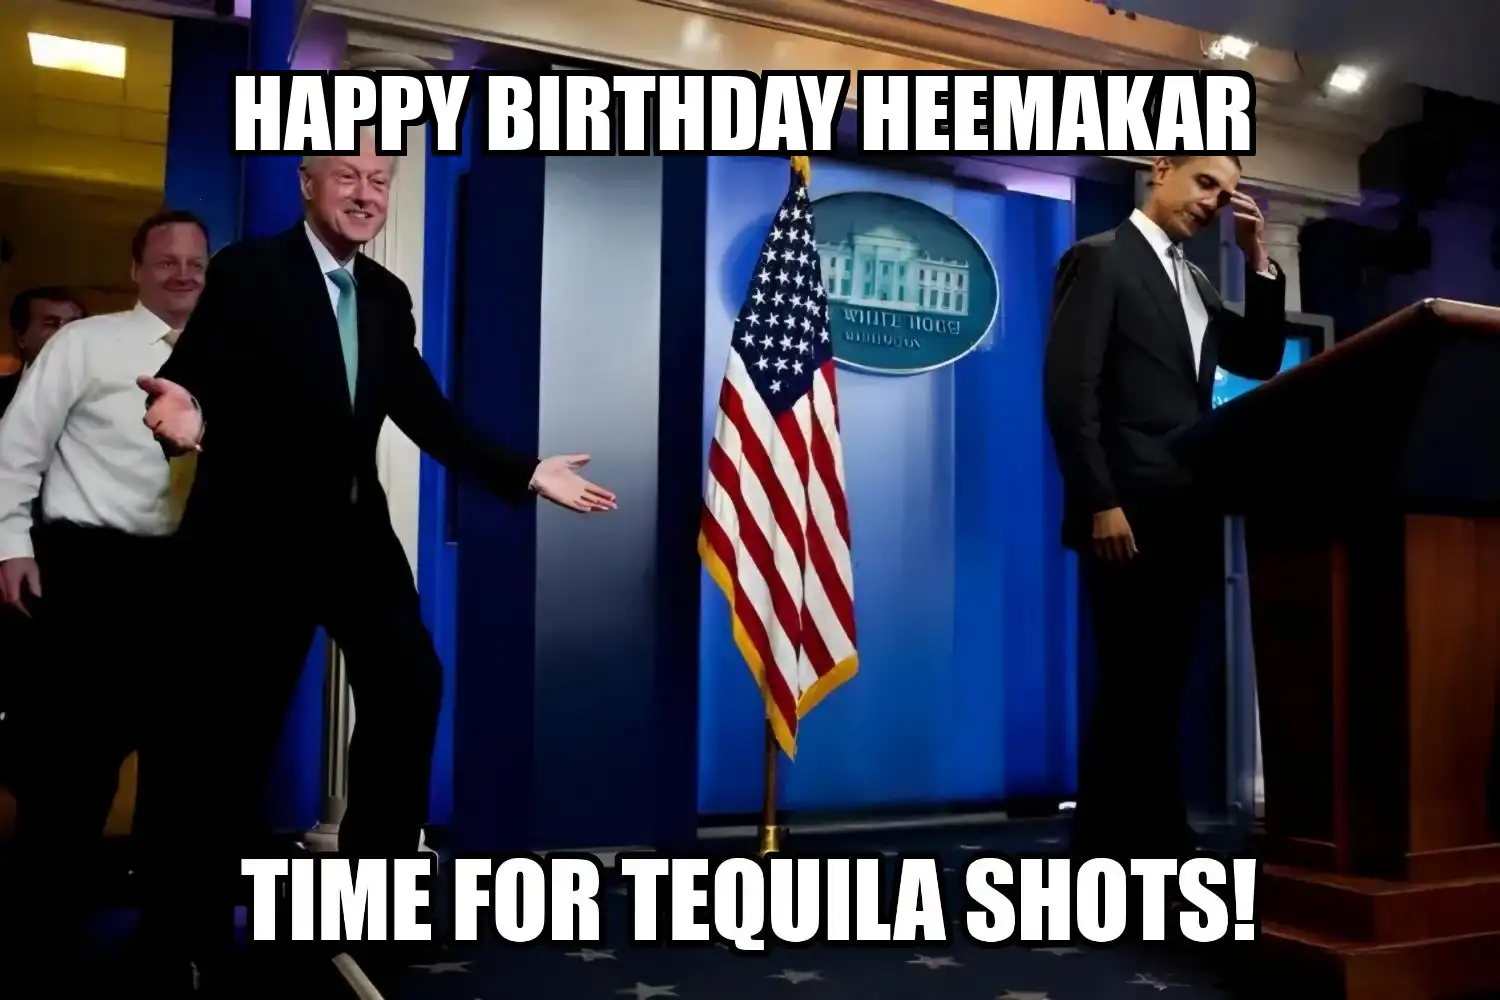 Happy Birthday Heemakar Time For Tequila Shots Memes